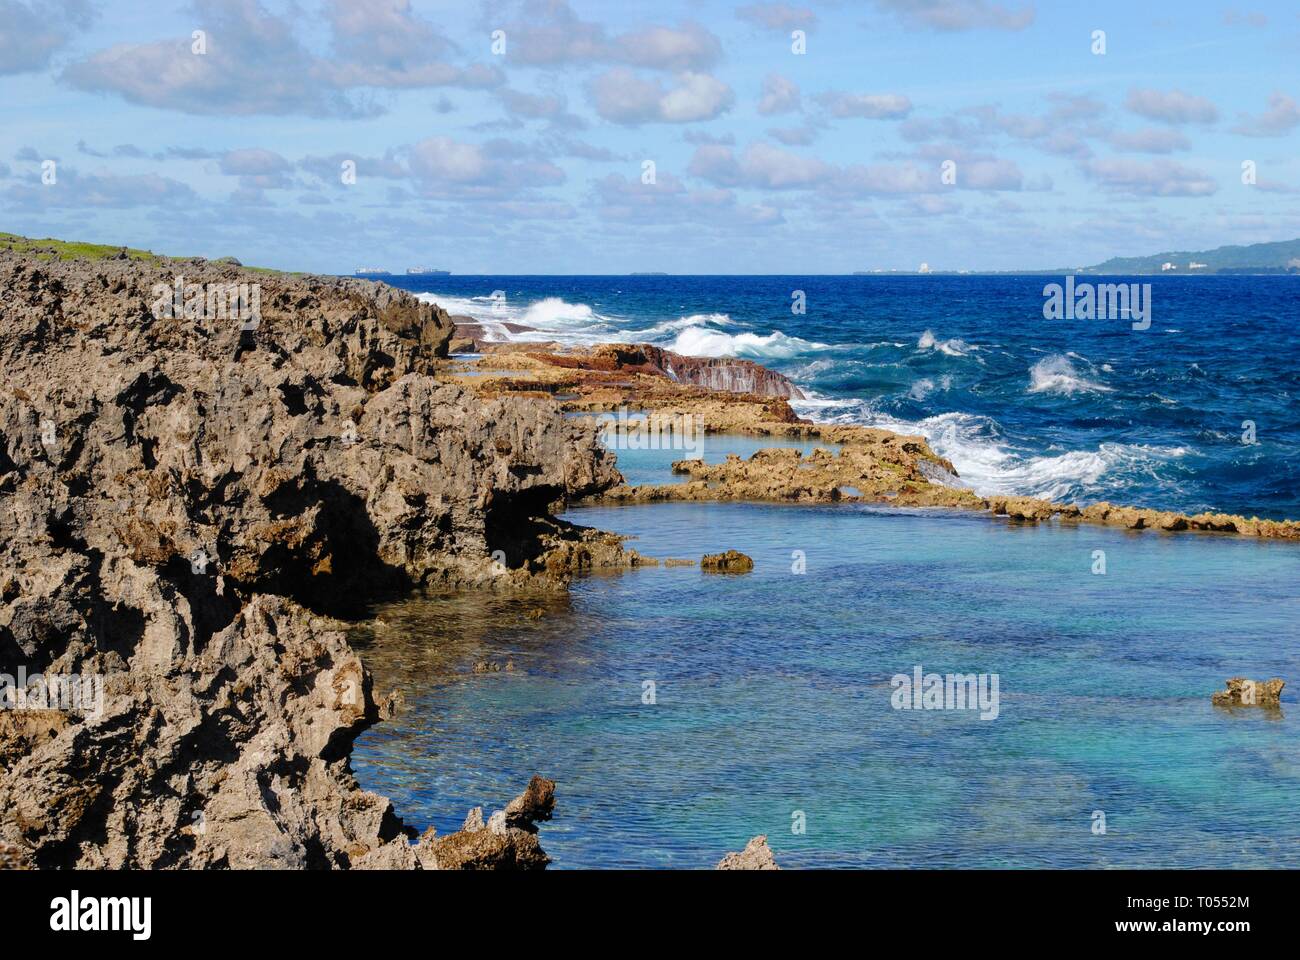 Sharp rocky shorelines with clear blue waters of the Tinian channel and a view of Saipan island in the far distance Stock Photo